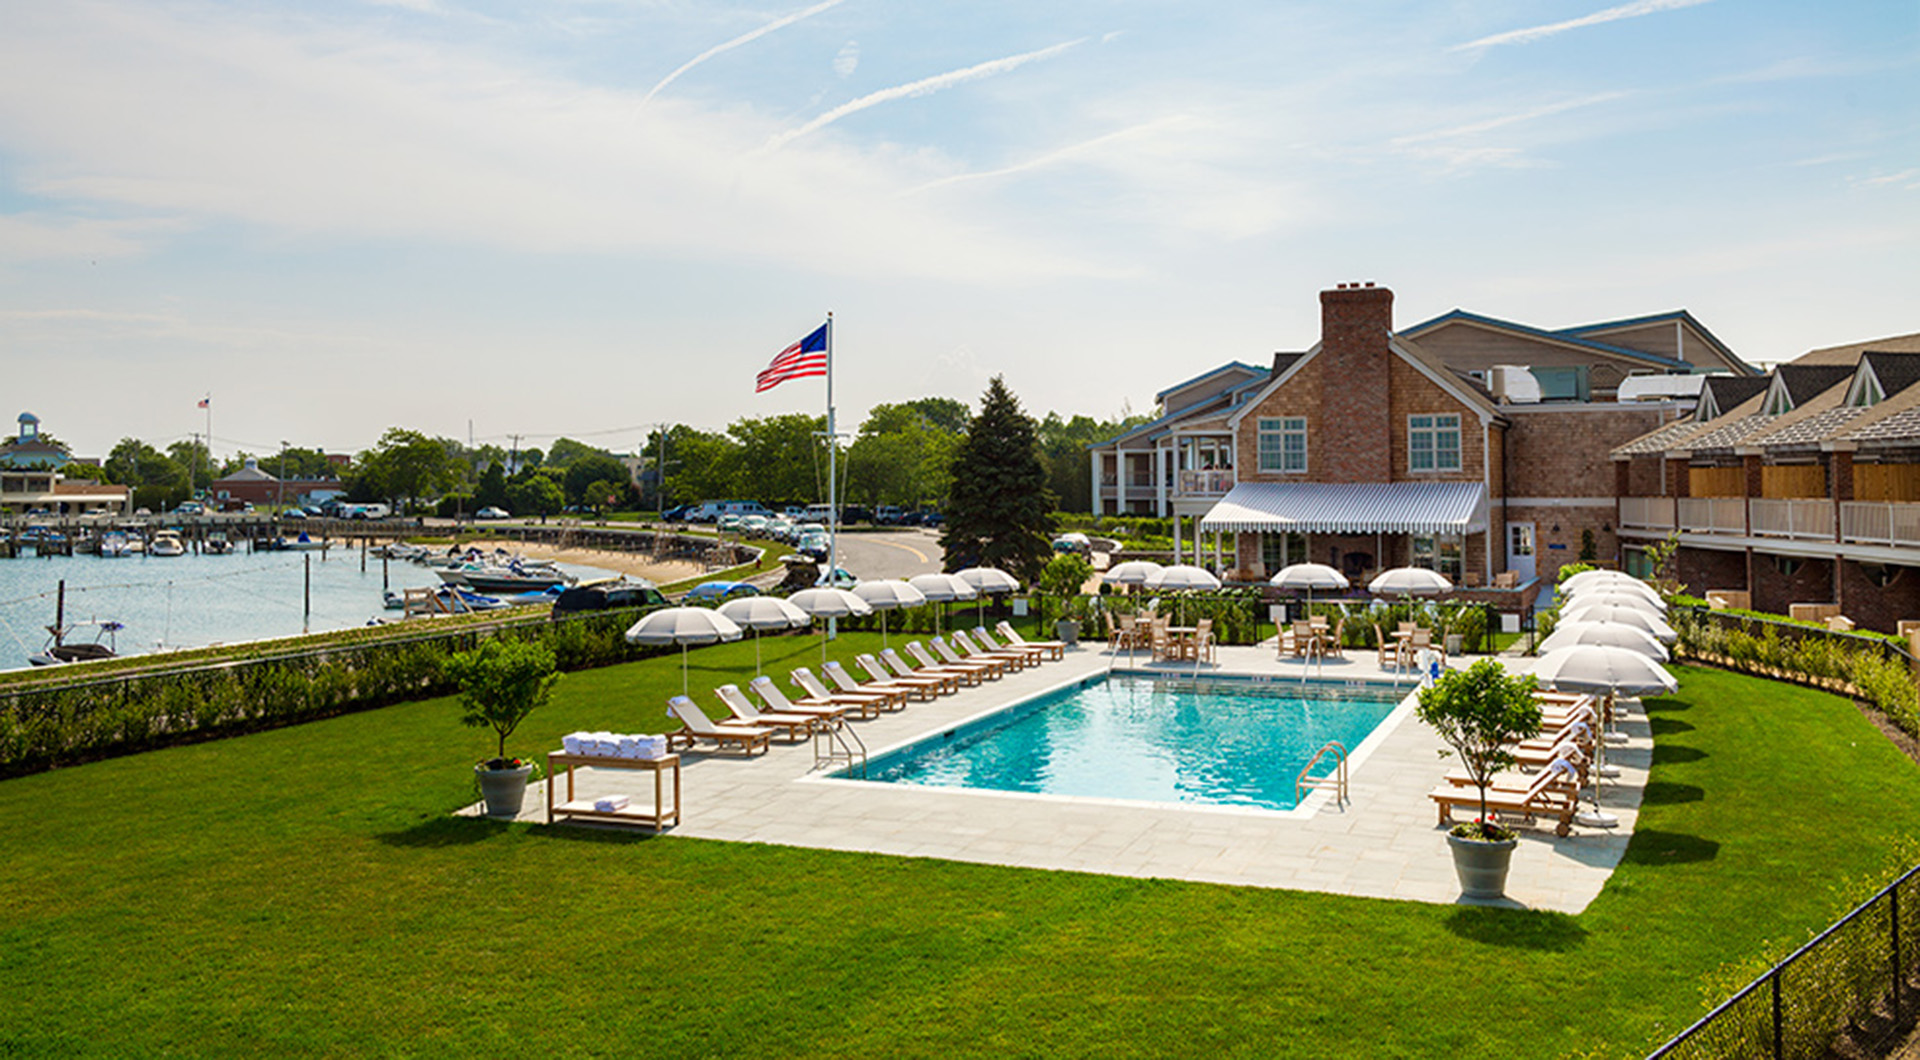 Baron’s Cove is among Sag Harbor's favorite hotels